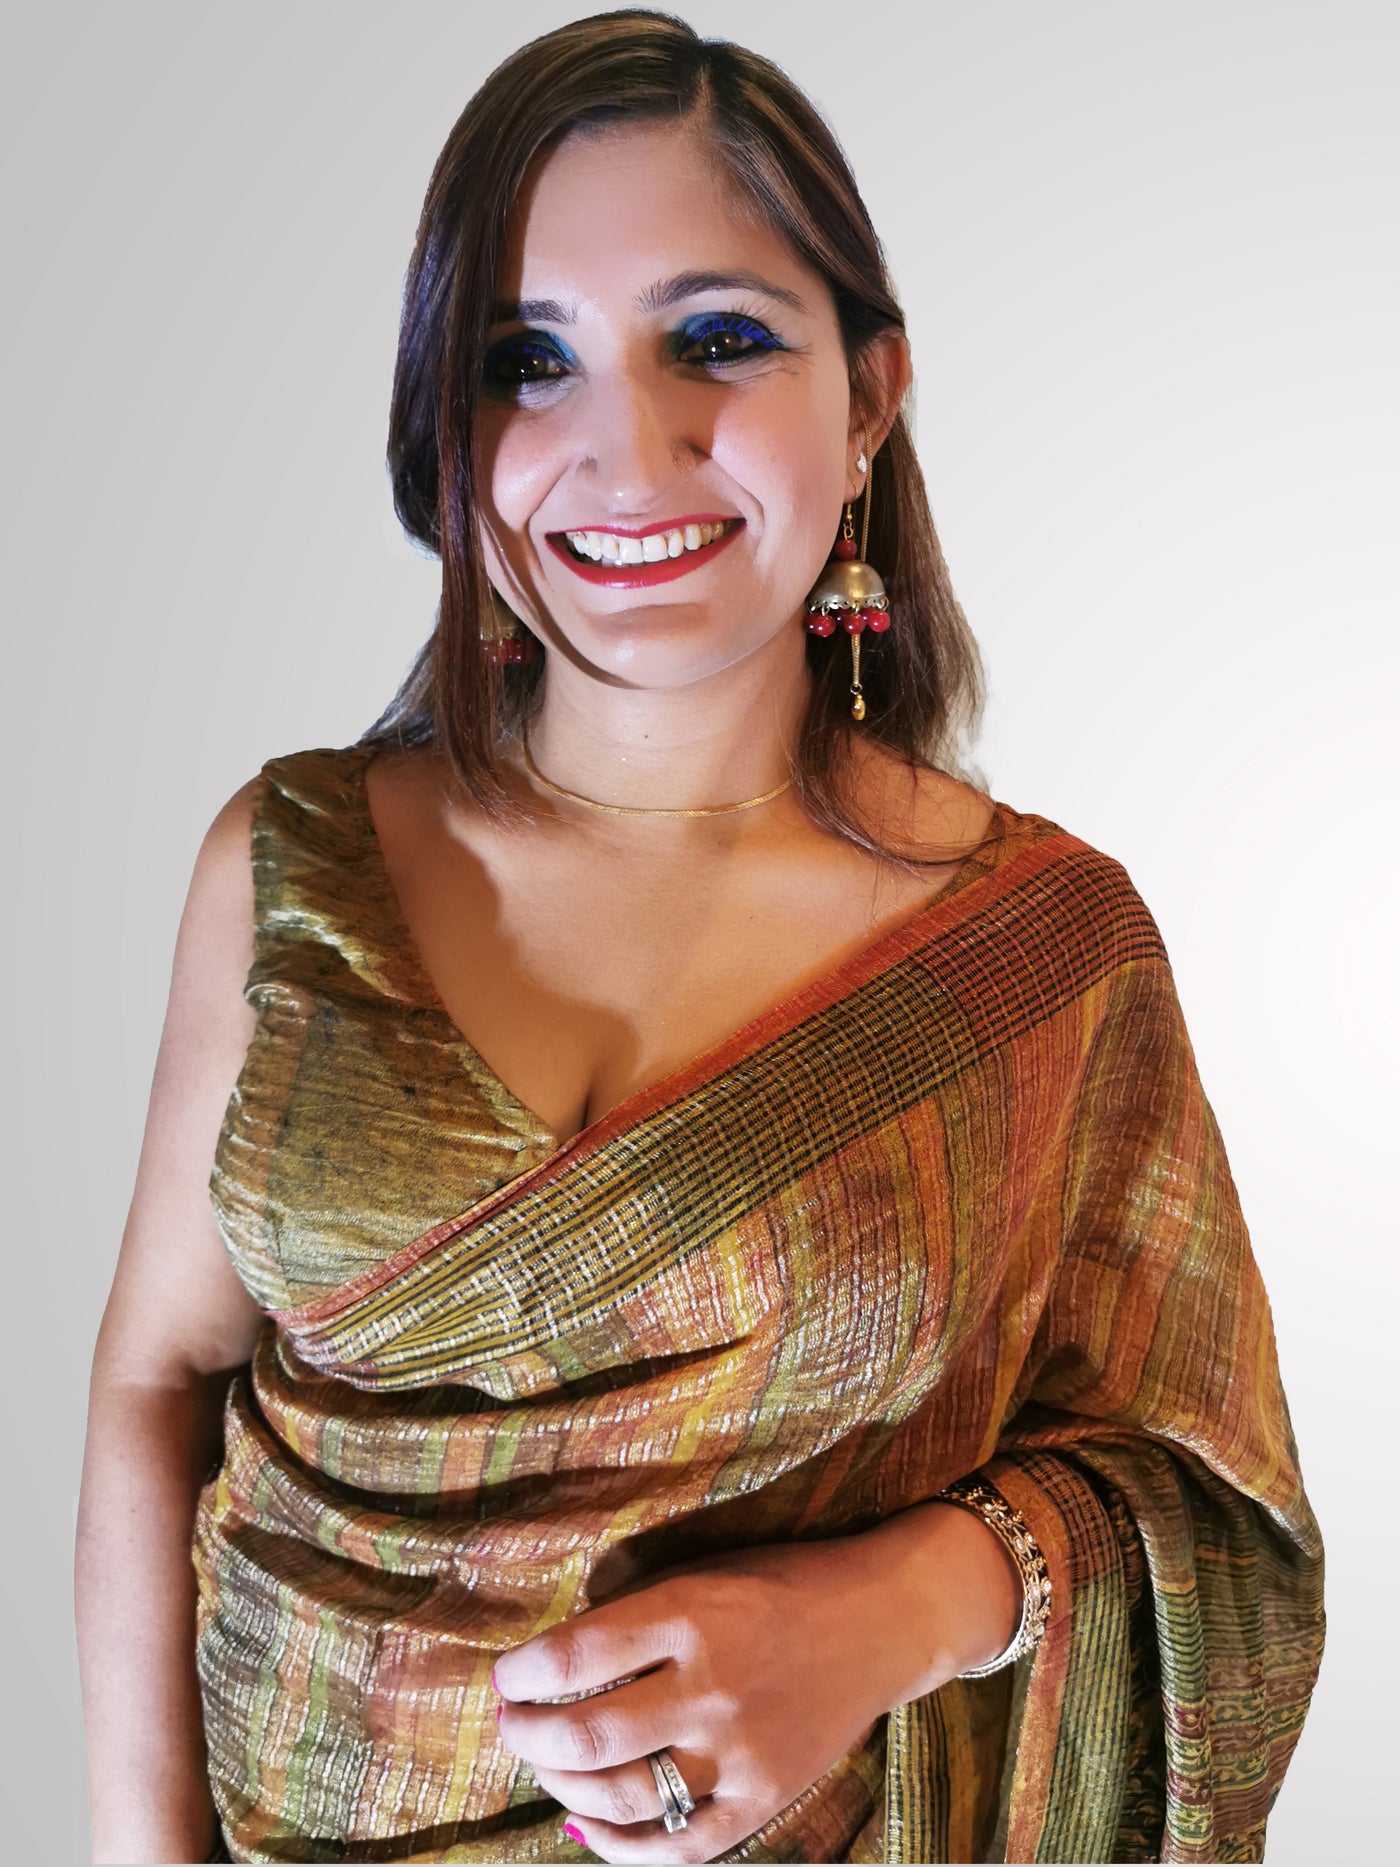 Saree in Soft Earthy Toned Tissue Silk with Gradient Design - Indian Clothing in Denver, CO, Aurora, CO, Boulder, CO, Fort Collins, CO, Colorado Springs, CO, Parker, CO, Highlands Ranch, CO, Cherry Creek, CO, Centennial, CO, and Longmont, CO. Nationwide shipping USA - India Fashion X